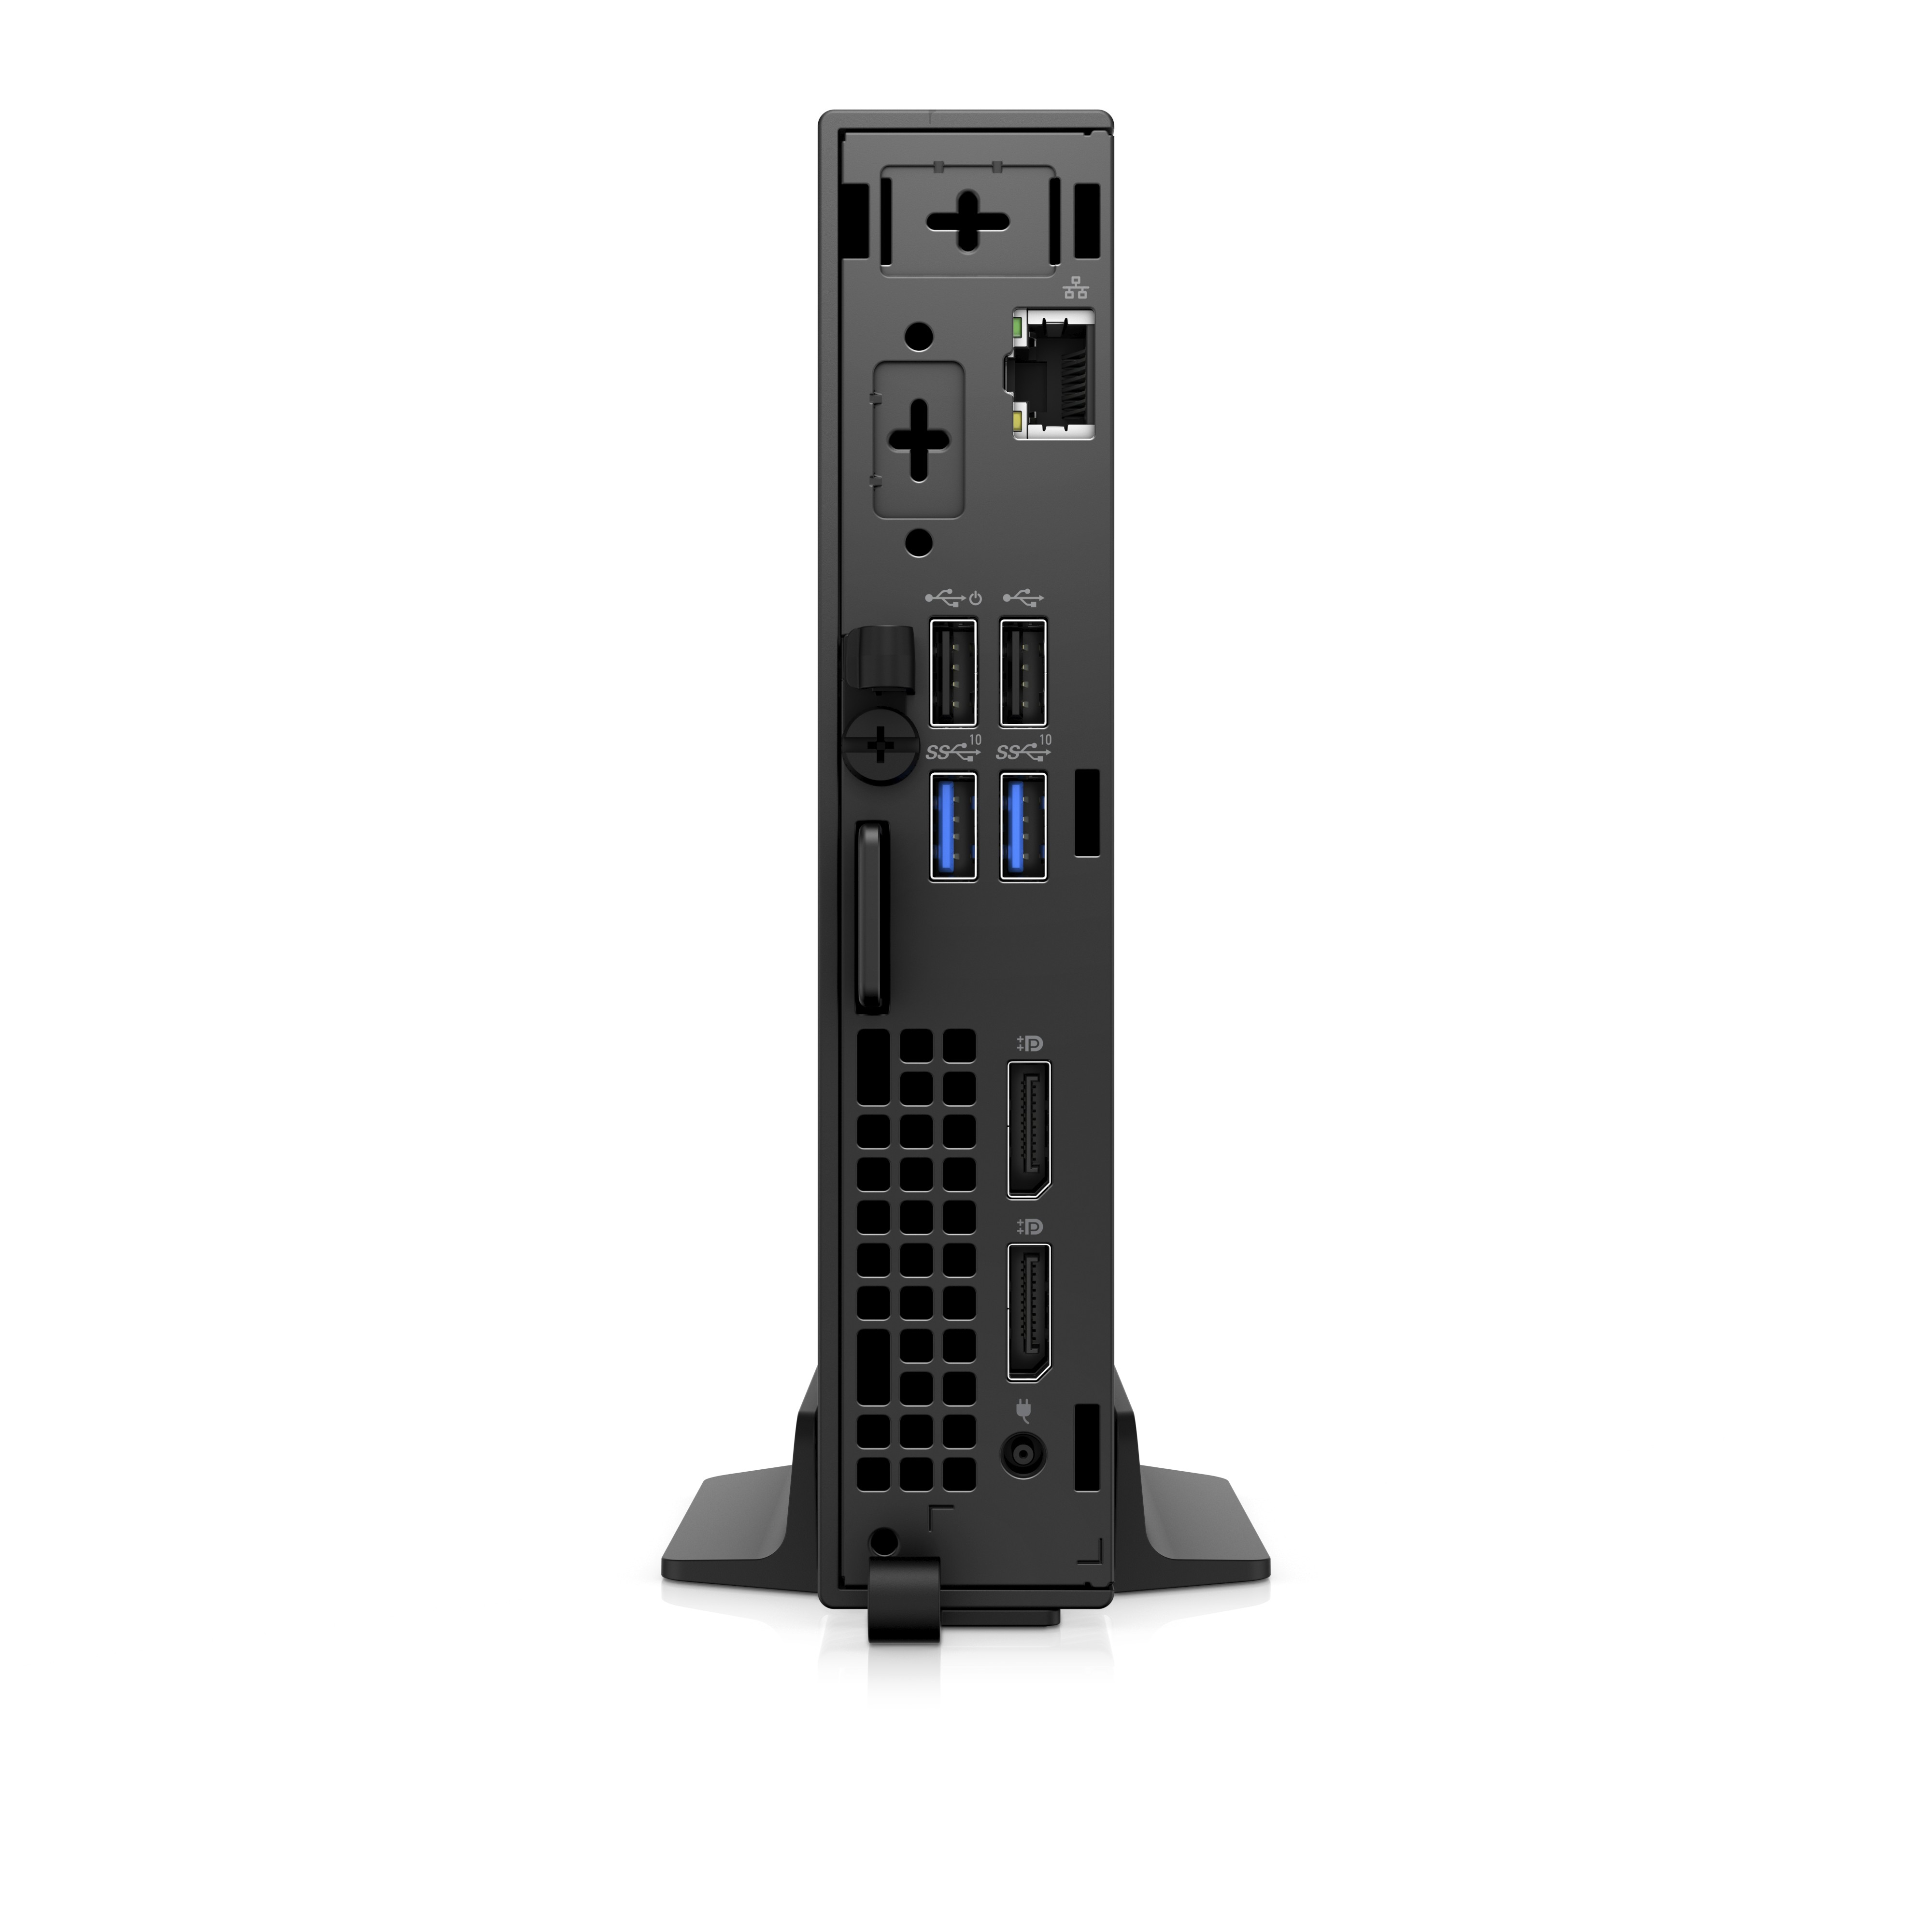 OptiPlex 3000 Thin Client|TPM|Pentium N6005|8GB RAM|256GB SSD|Integrated|65W|Verti Stand|Mouse|W10 IoT Ent|3Y ProSpt